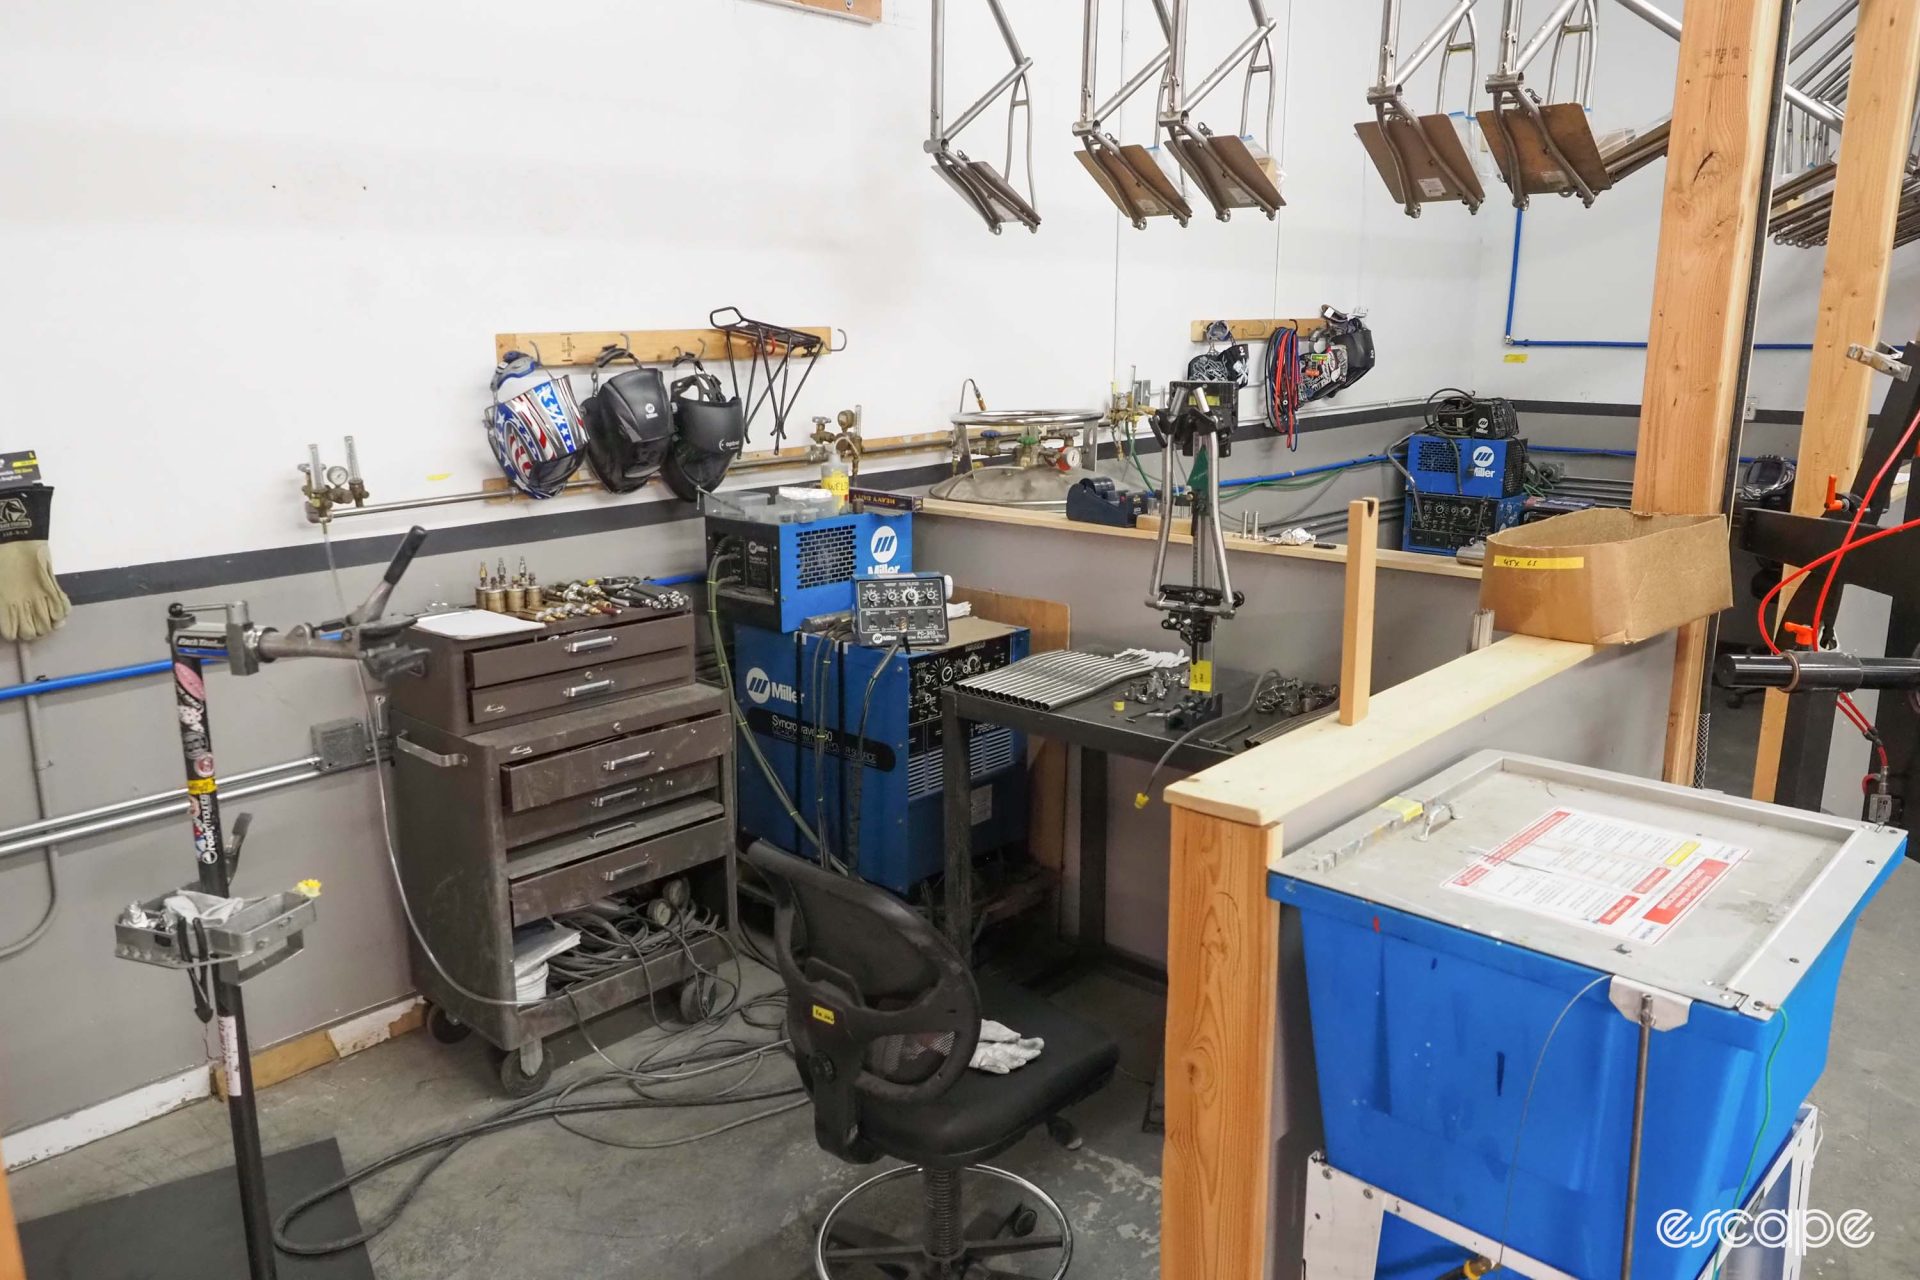 One of the TIG welding stations; it's a small affair with a frame jig on a small table and a standard office chair, accompanied by a tool case and welding equipment.